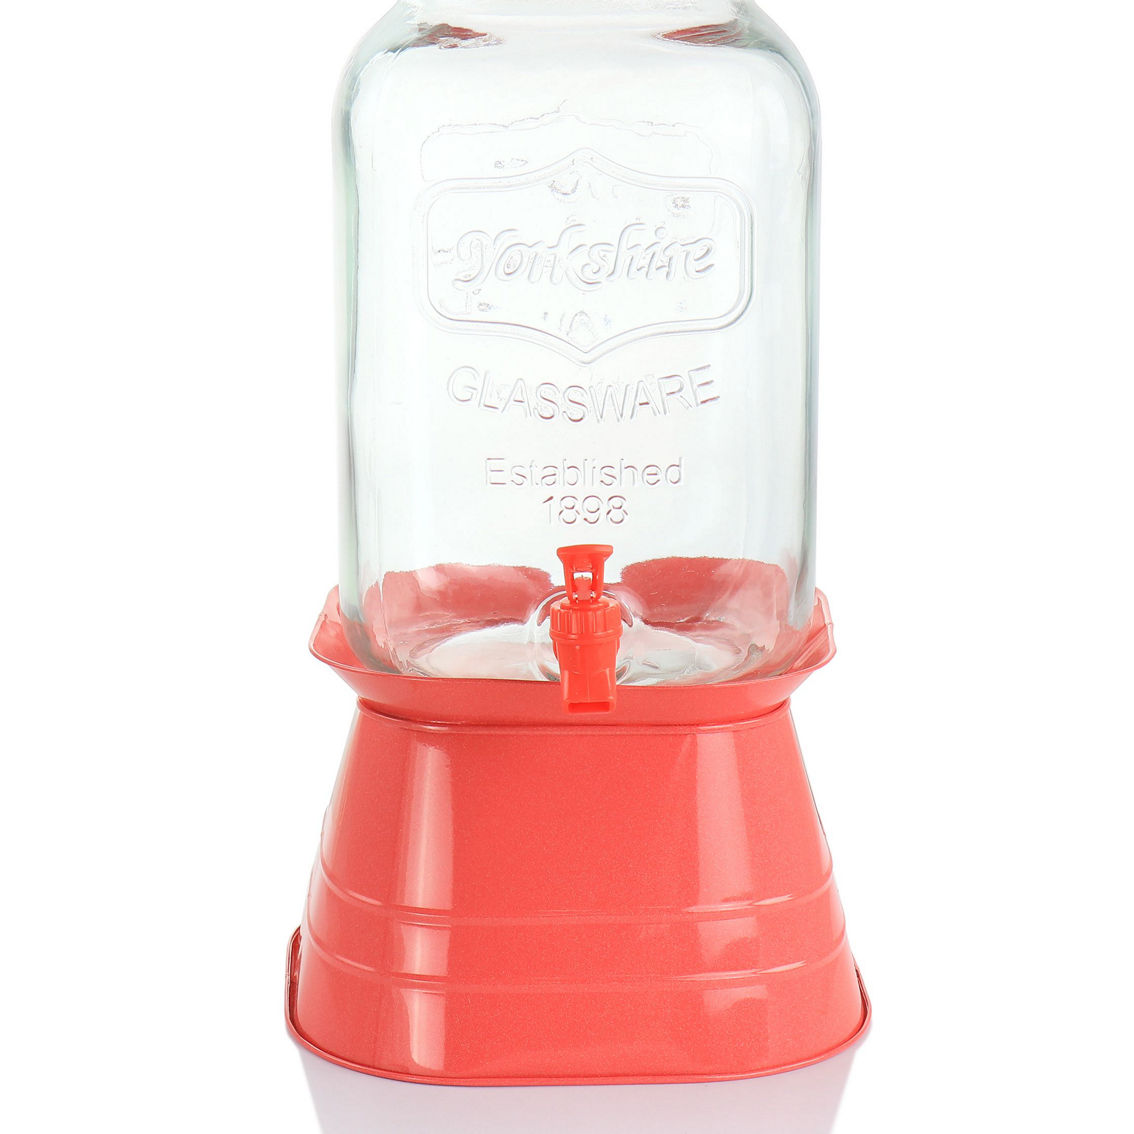 Gibson Home Chiara 2 Gallon Glass Mason Jar Dispenser with Metal Lid and Base in - Image 2 of 5